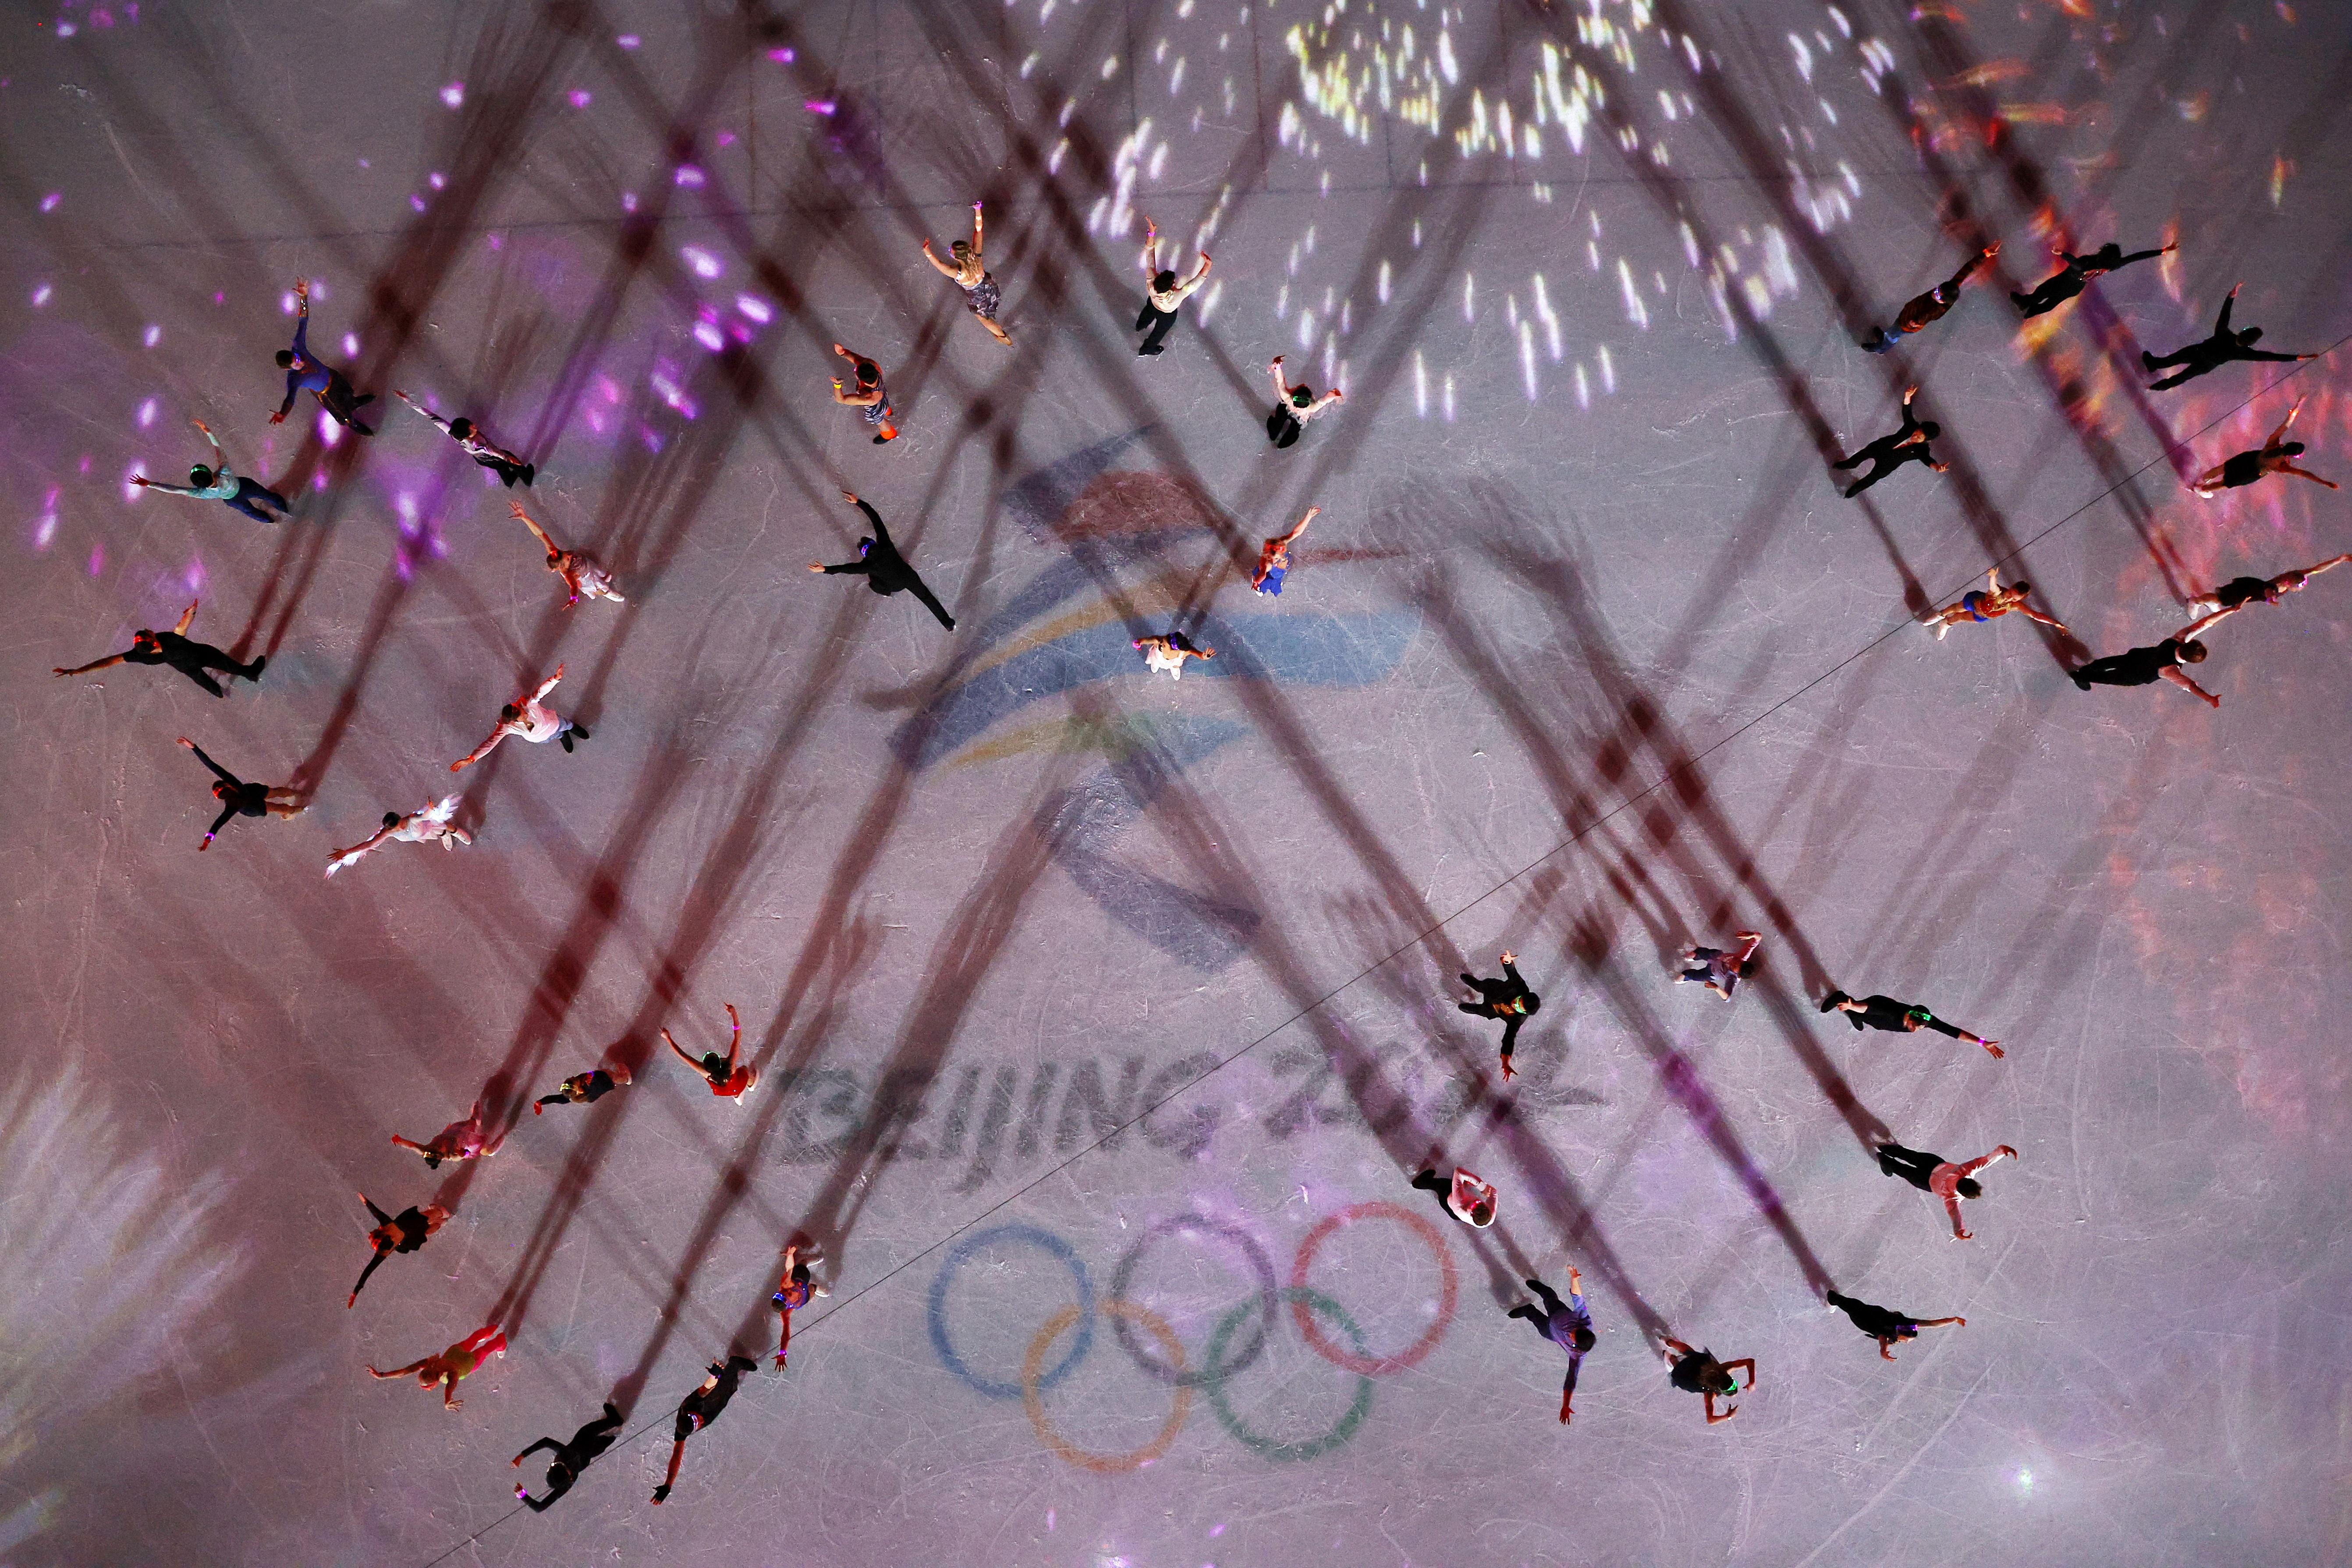 Beijing 2022 Winter Olympic Games GettyImages 1371670410